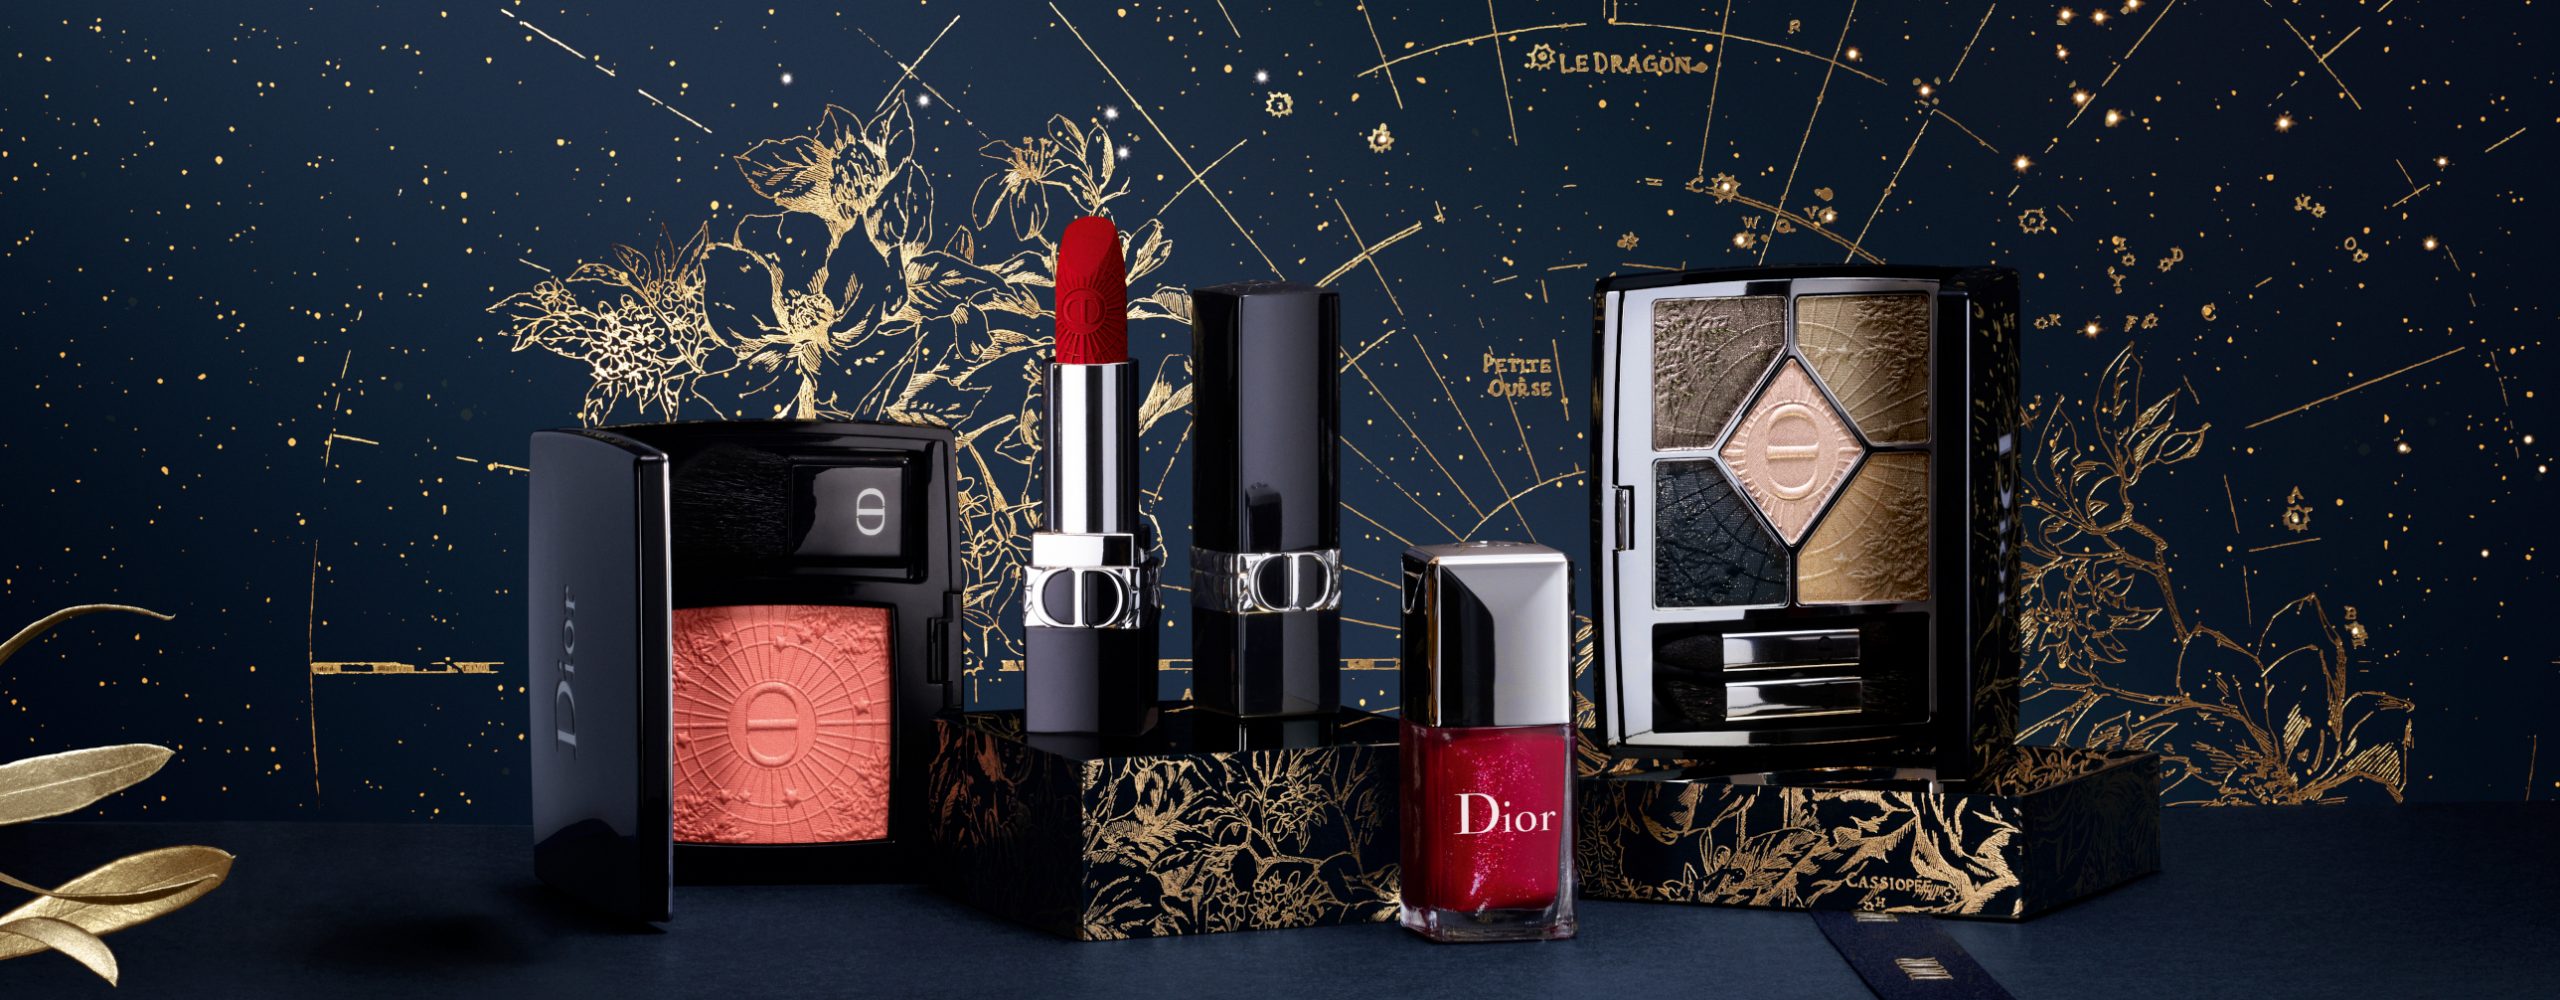 Dior  Holiday 2022 The Atelier of Dreams Collection Review and Swatches   The Happy Sloths Beauty Makeup and Skincare Blog with Reviews and  Swatches